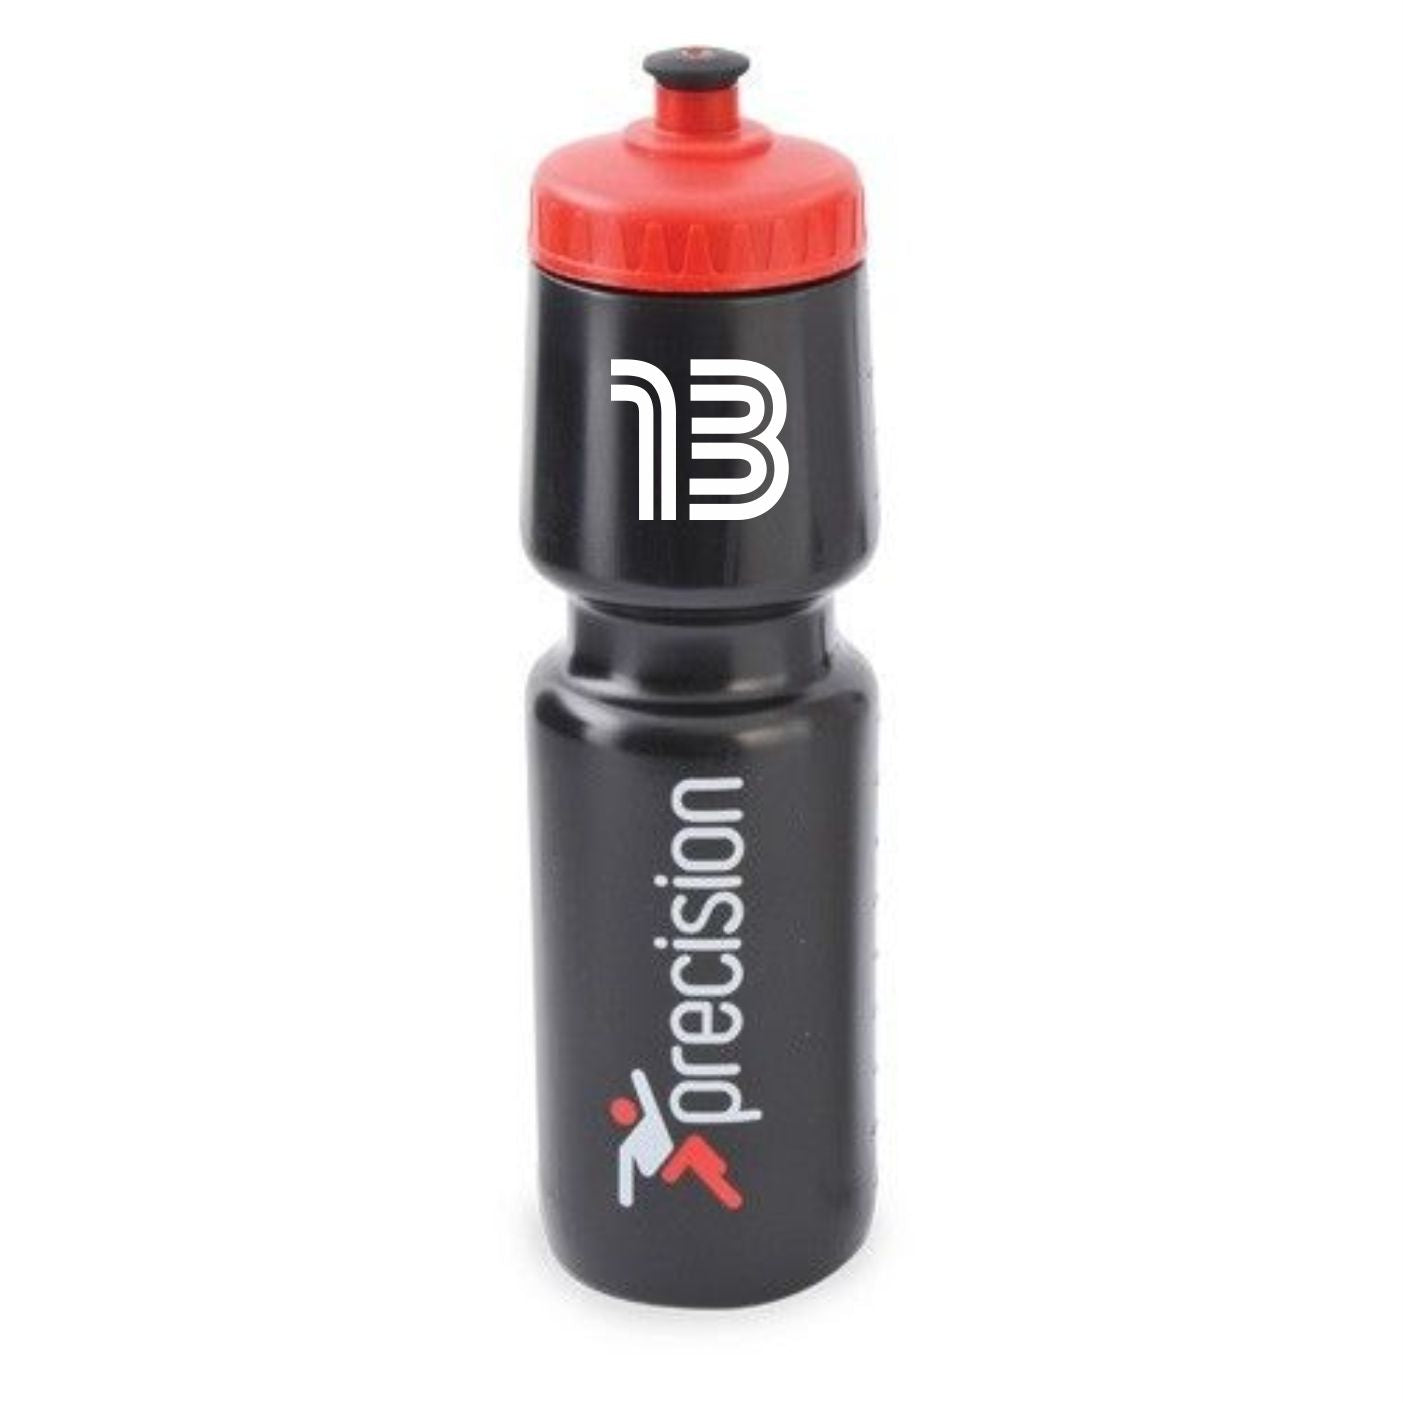 PS Olympic Water Bottle